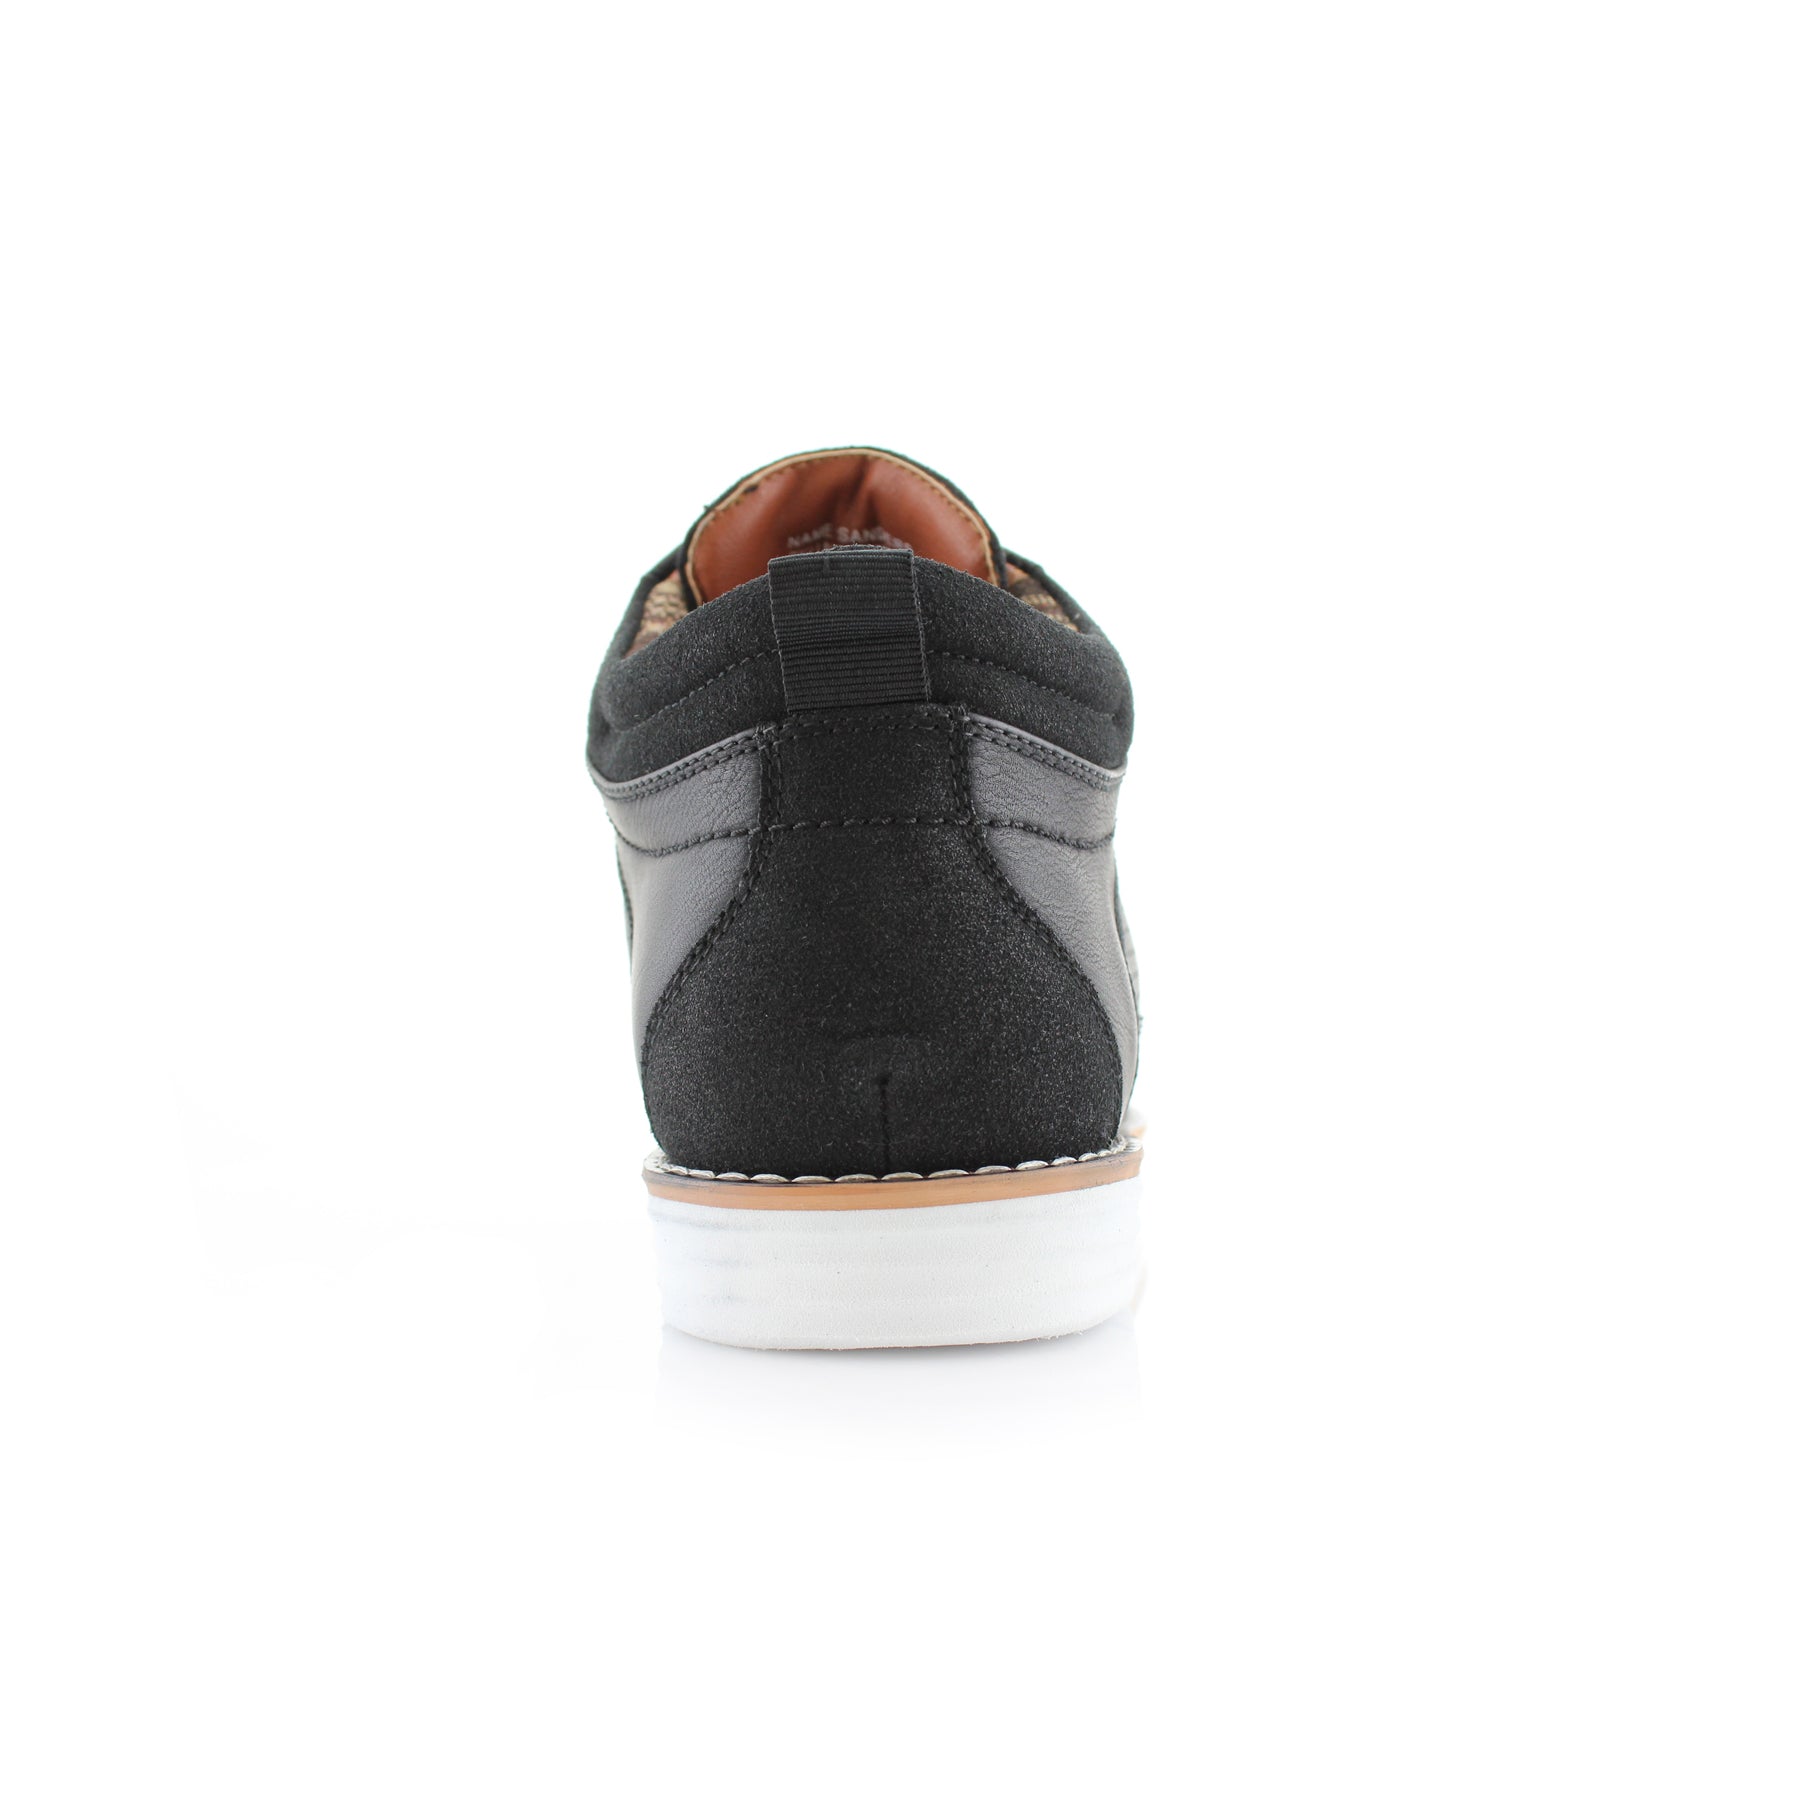 Duo-Textured Perforated Sneakers | Sanders by Polar Fox | Conal Footwear | Back Angle View